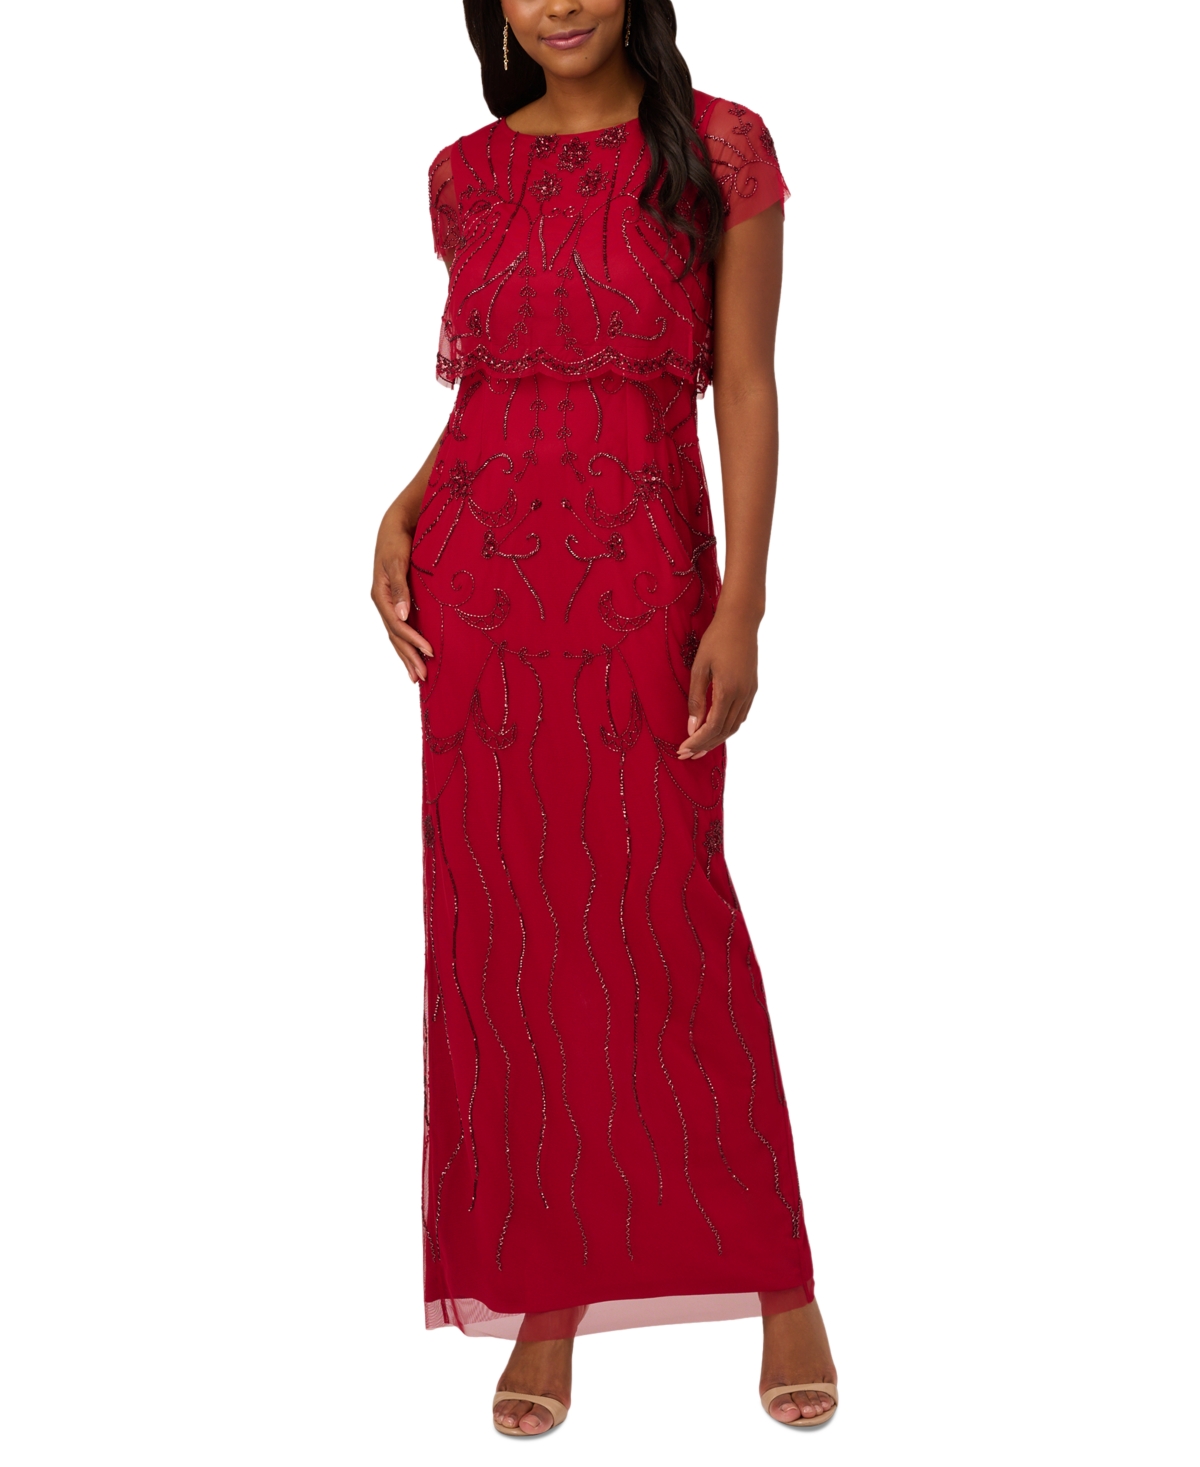 Best 1920s Prom Dresses – Great Gatsby Style Gowns Adrianna Papell Petite Beaded Scalloped-Popover Gown - Cranberry $229.00 AT vintagedancer.com